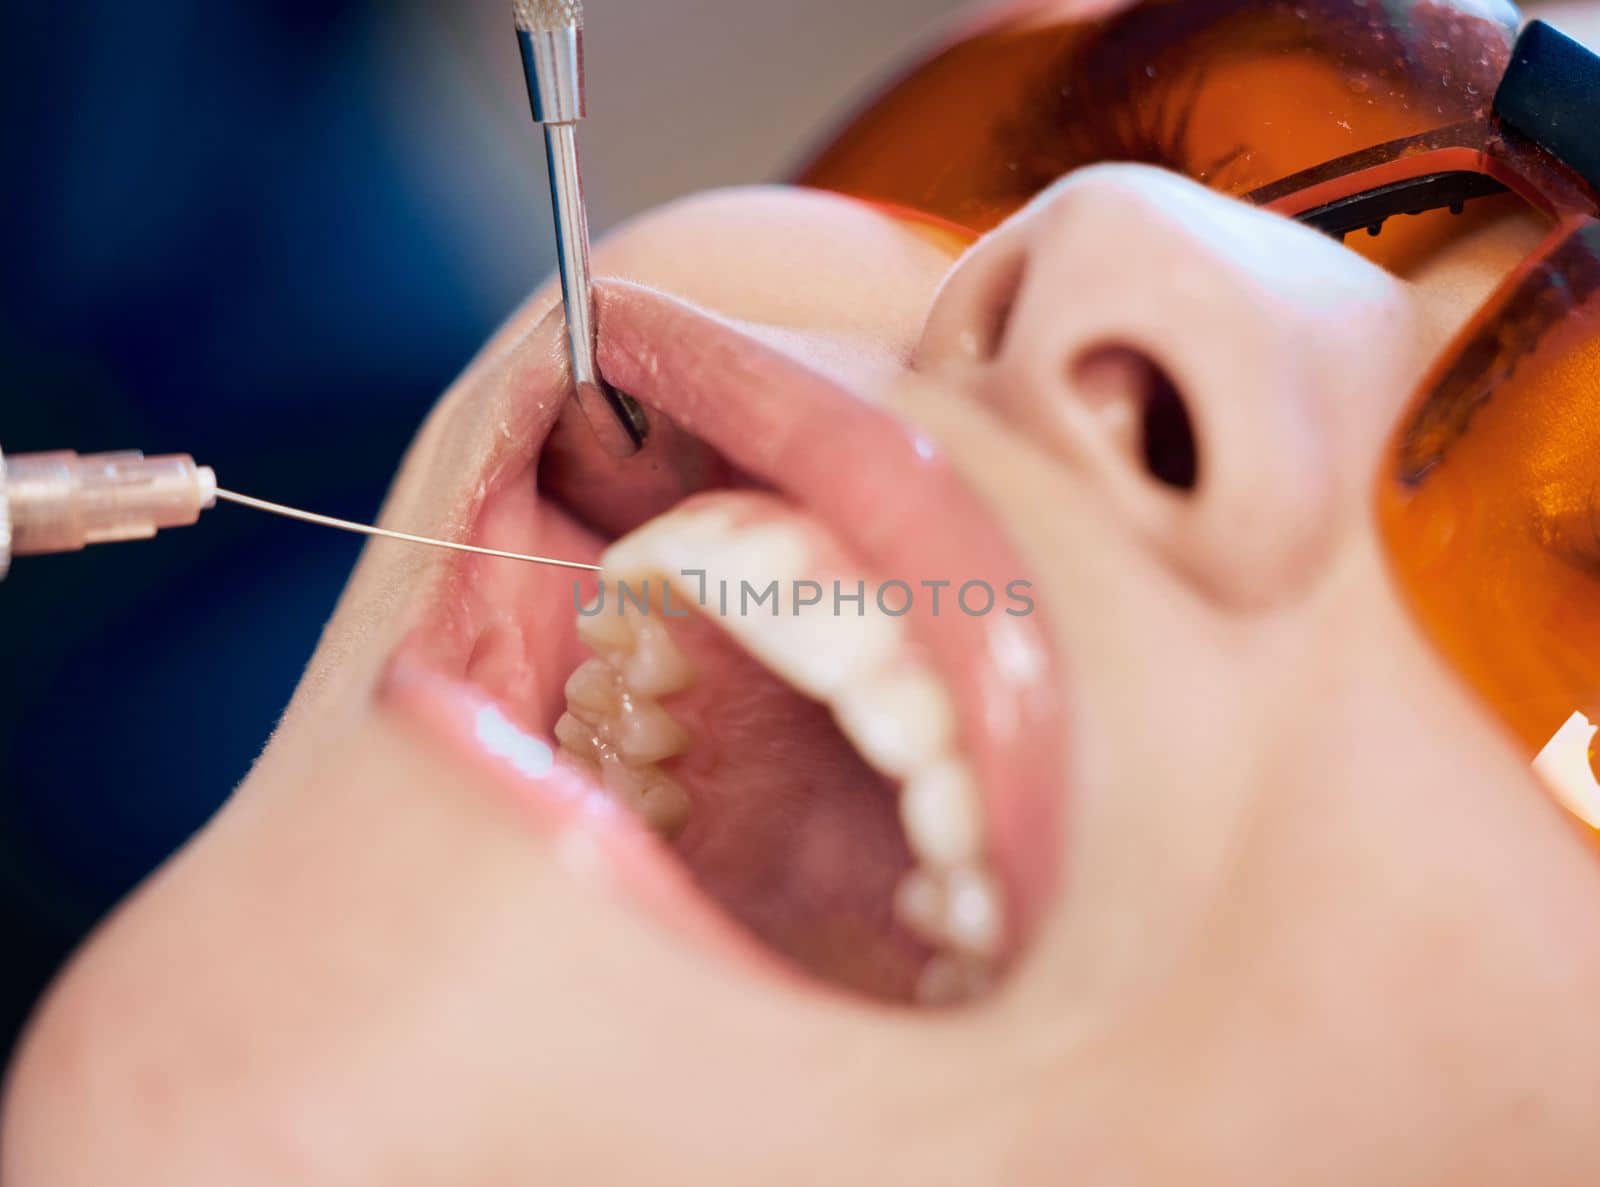 The worst part of the process. a woman receiving an injection at the dentists office